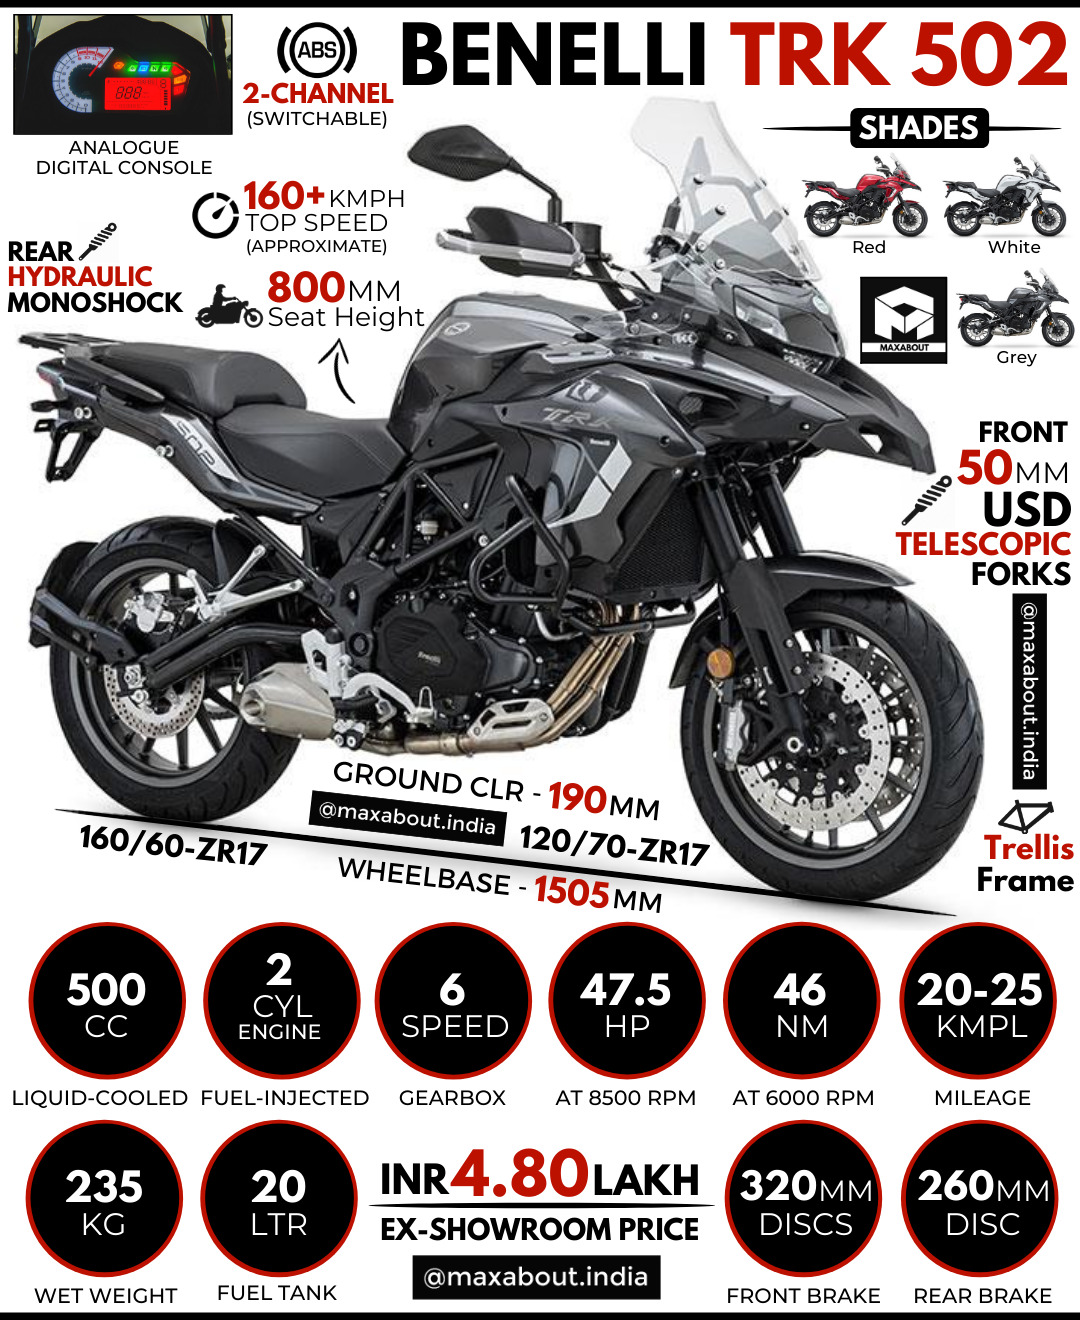 Benelli TRK 502: All You Need to Know